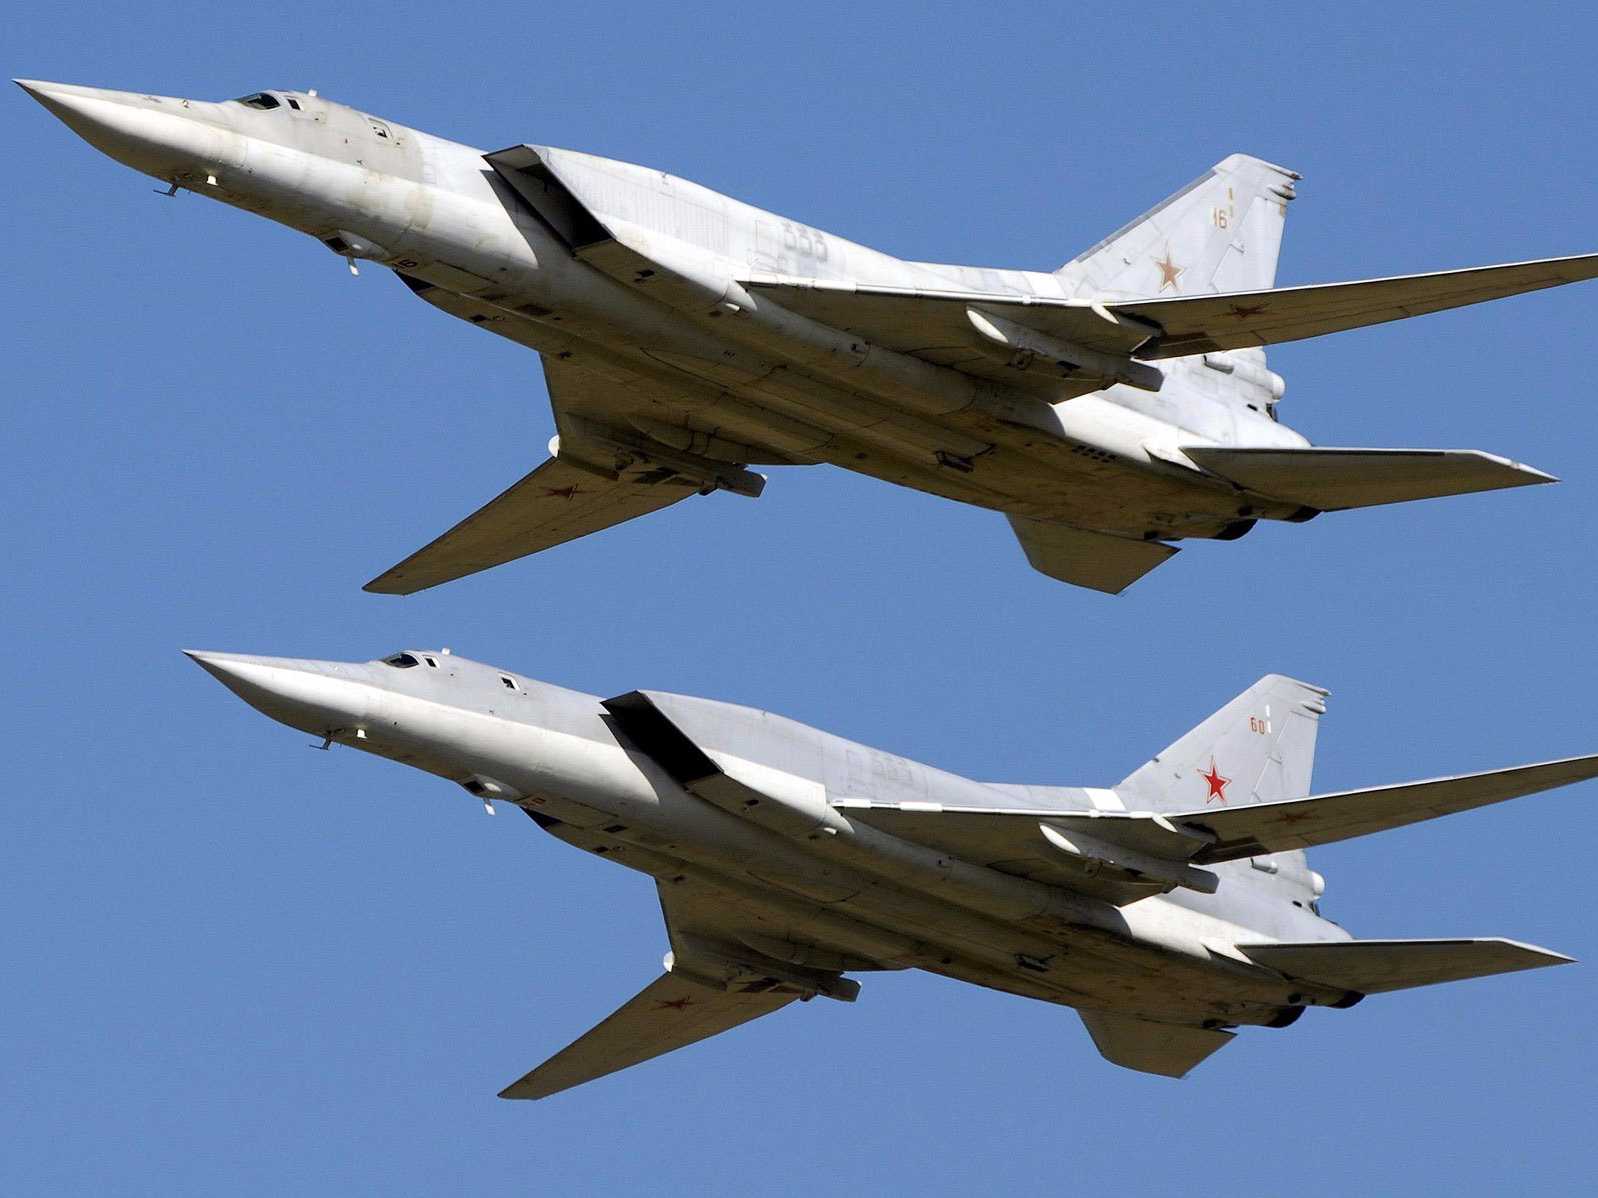 Swedich AF intercepts Russian planes flying with their transponders-off over Baltic region